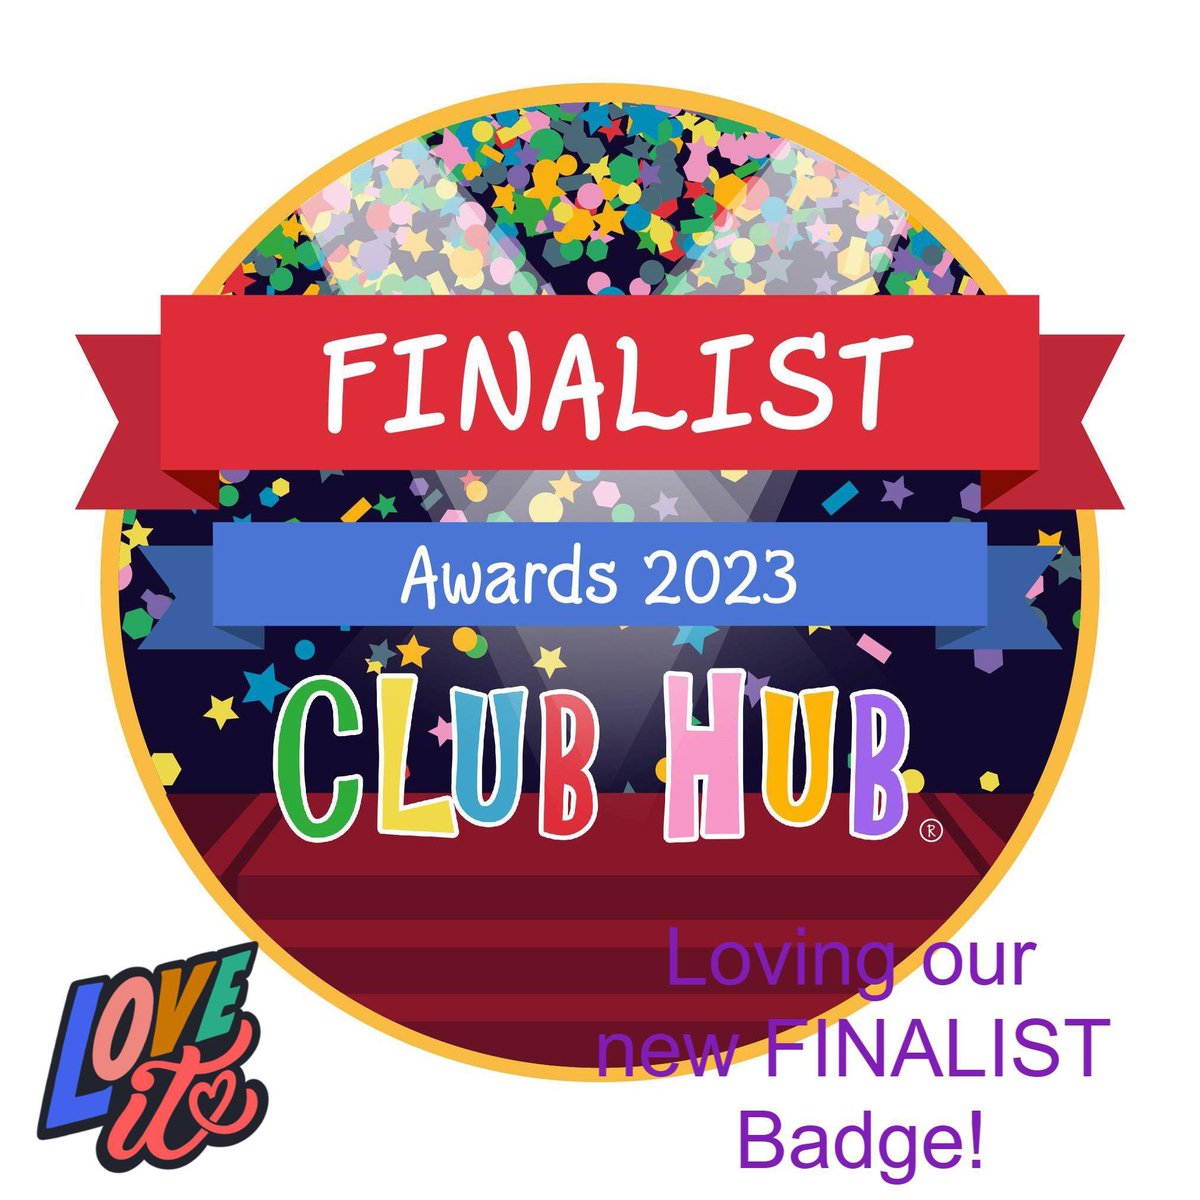 Loving our new FINALIST badge! #clubhubmember #clubhubawards2023